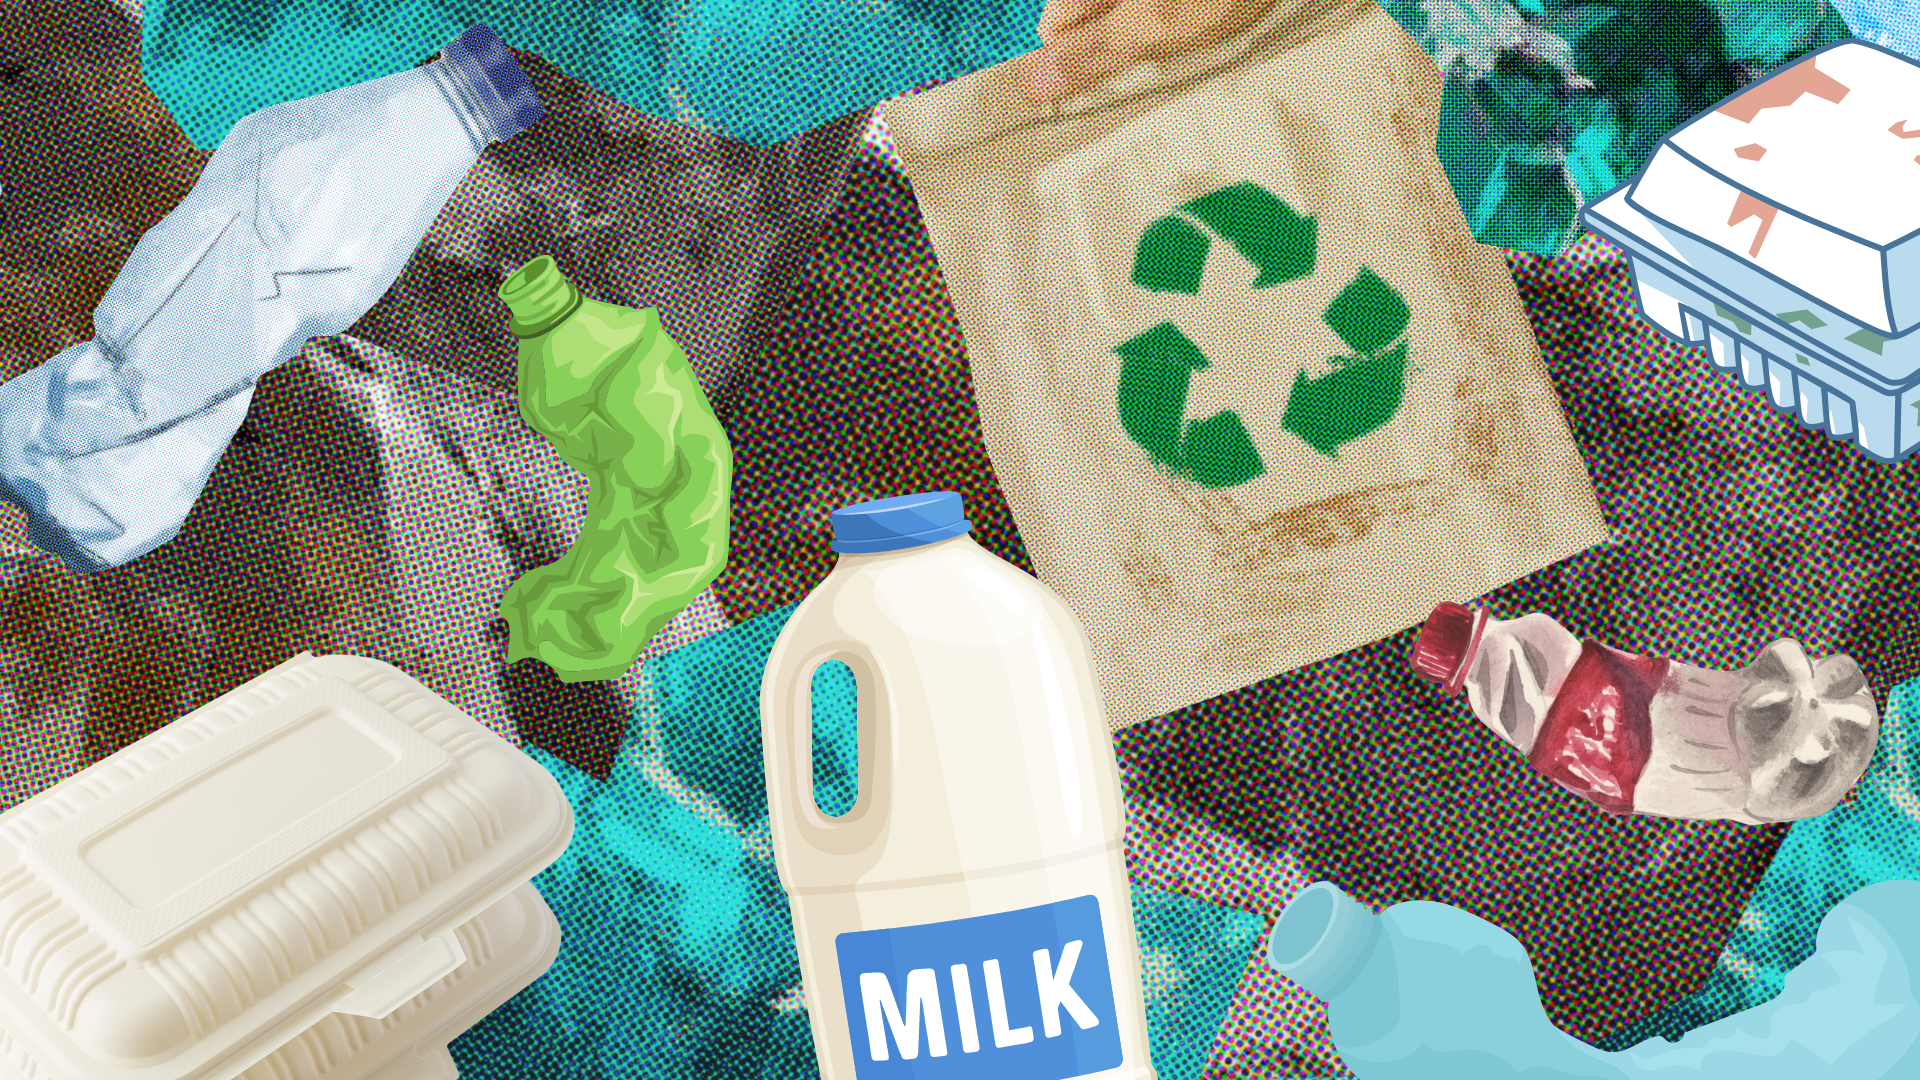 A Biochemical Approach to Plastic Waste